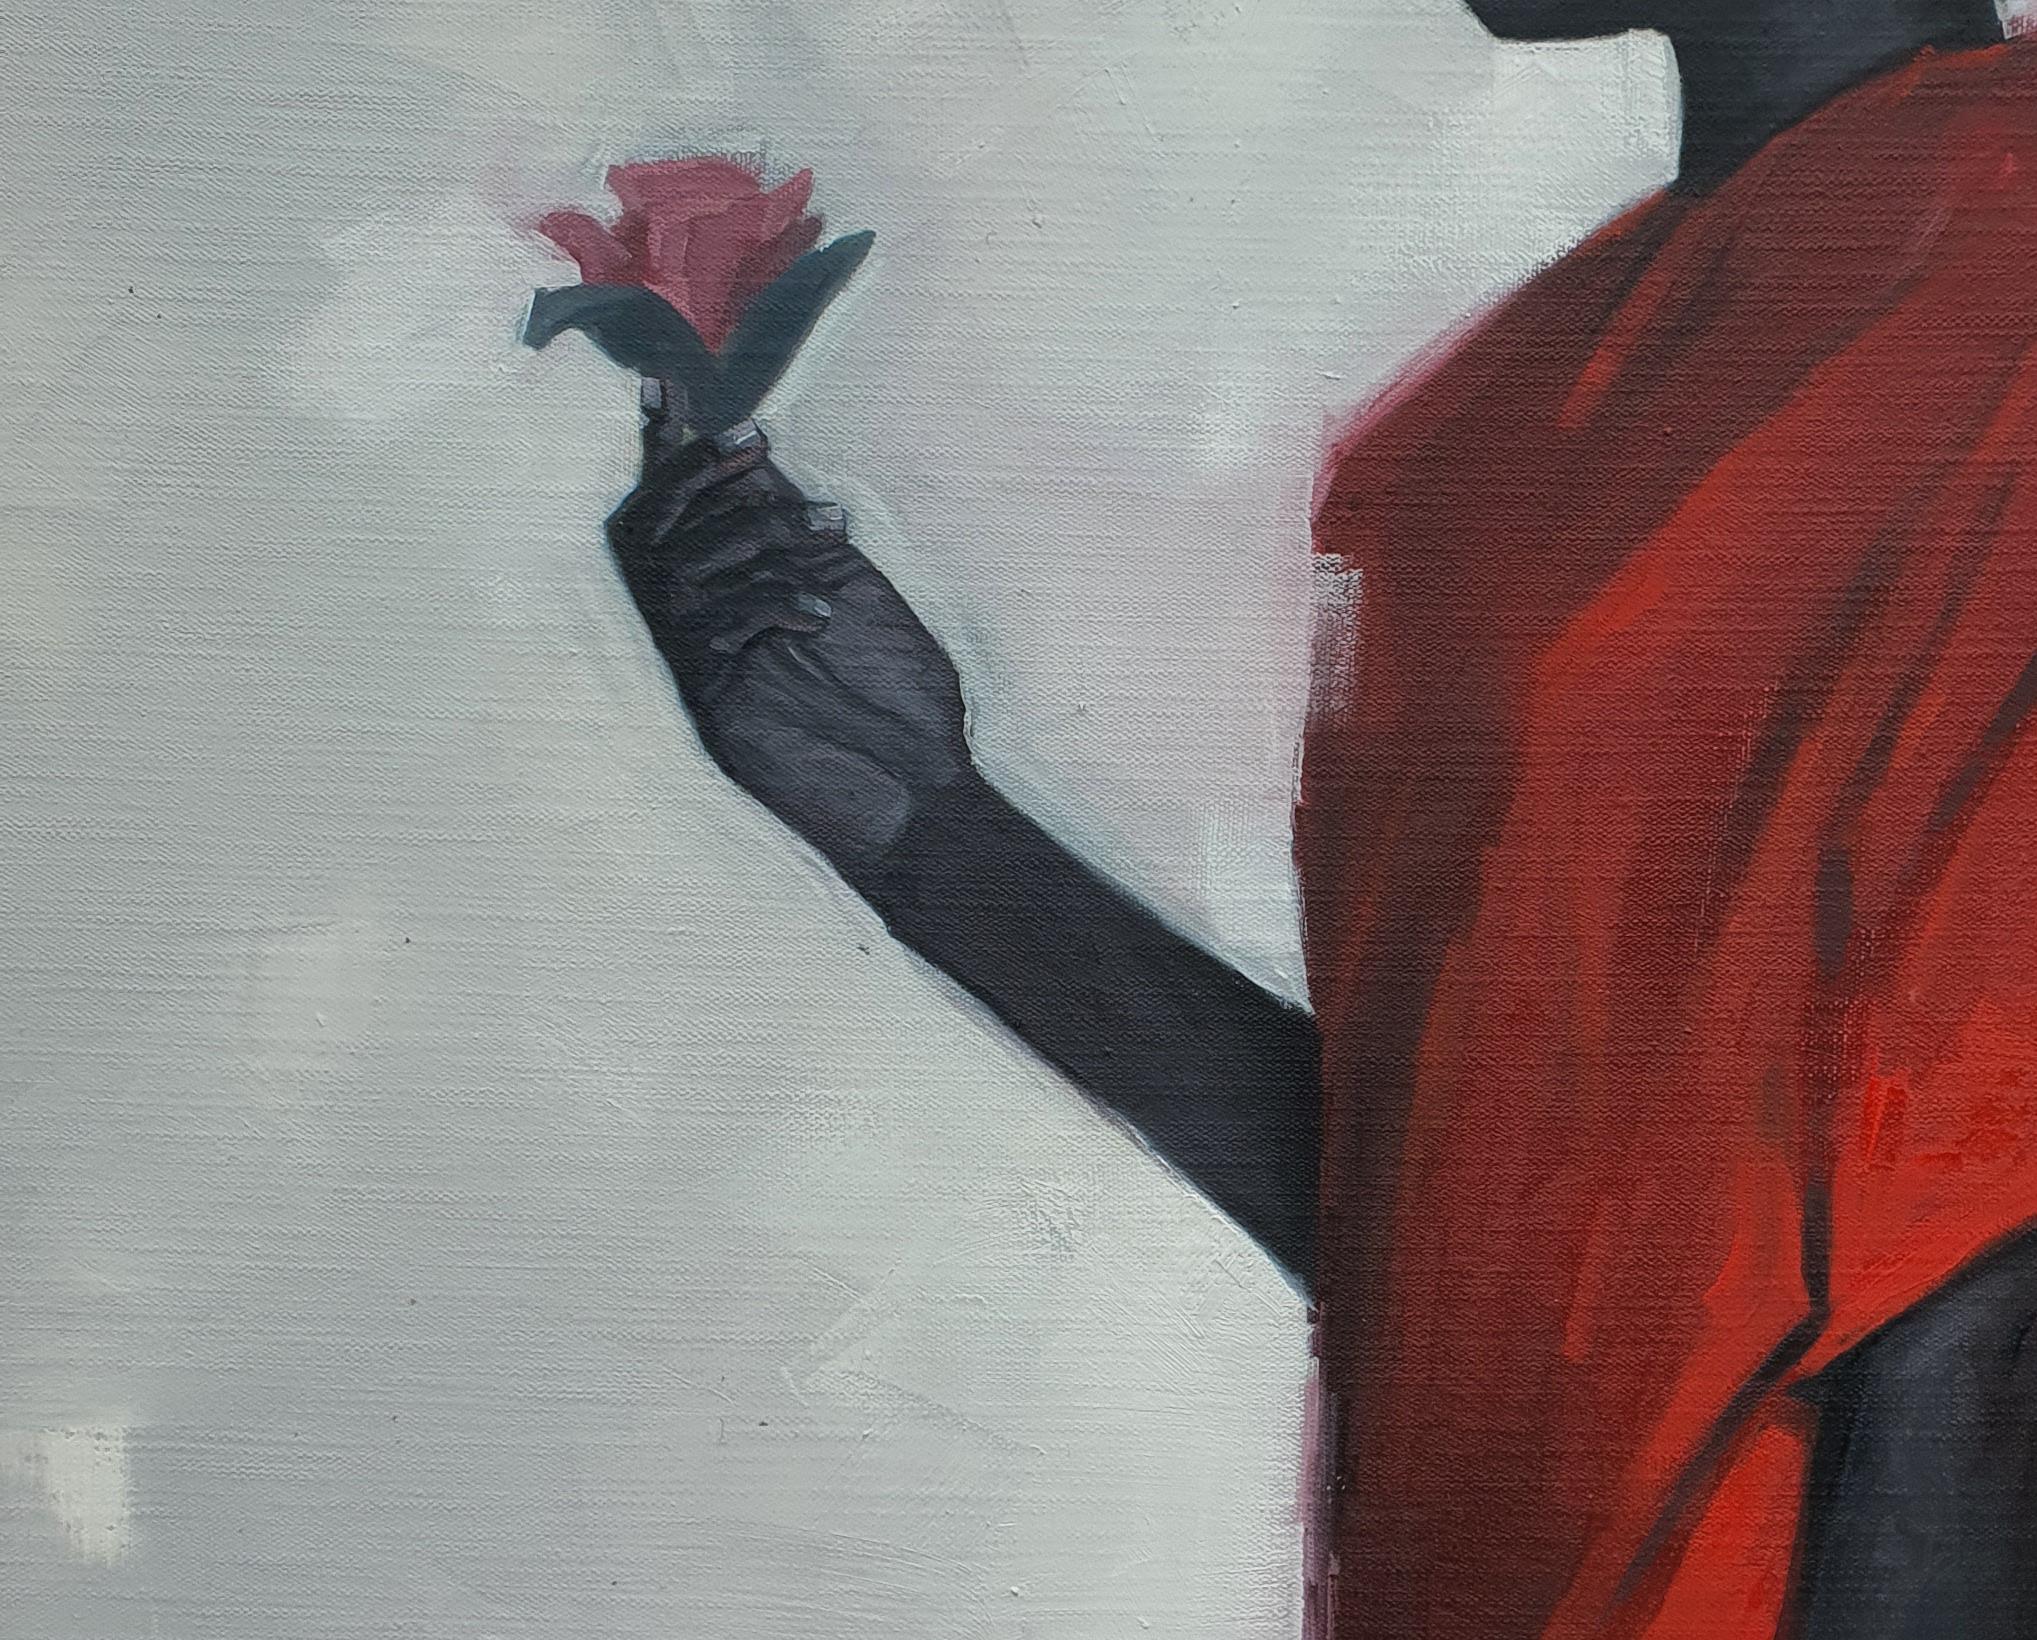 The Lady with a Rose 2 - Contemporary Painting by Ajegbomogun Damilola